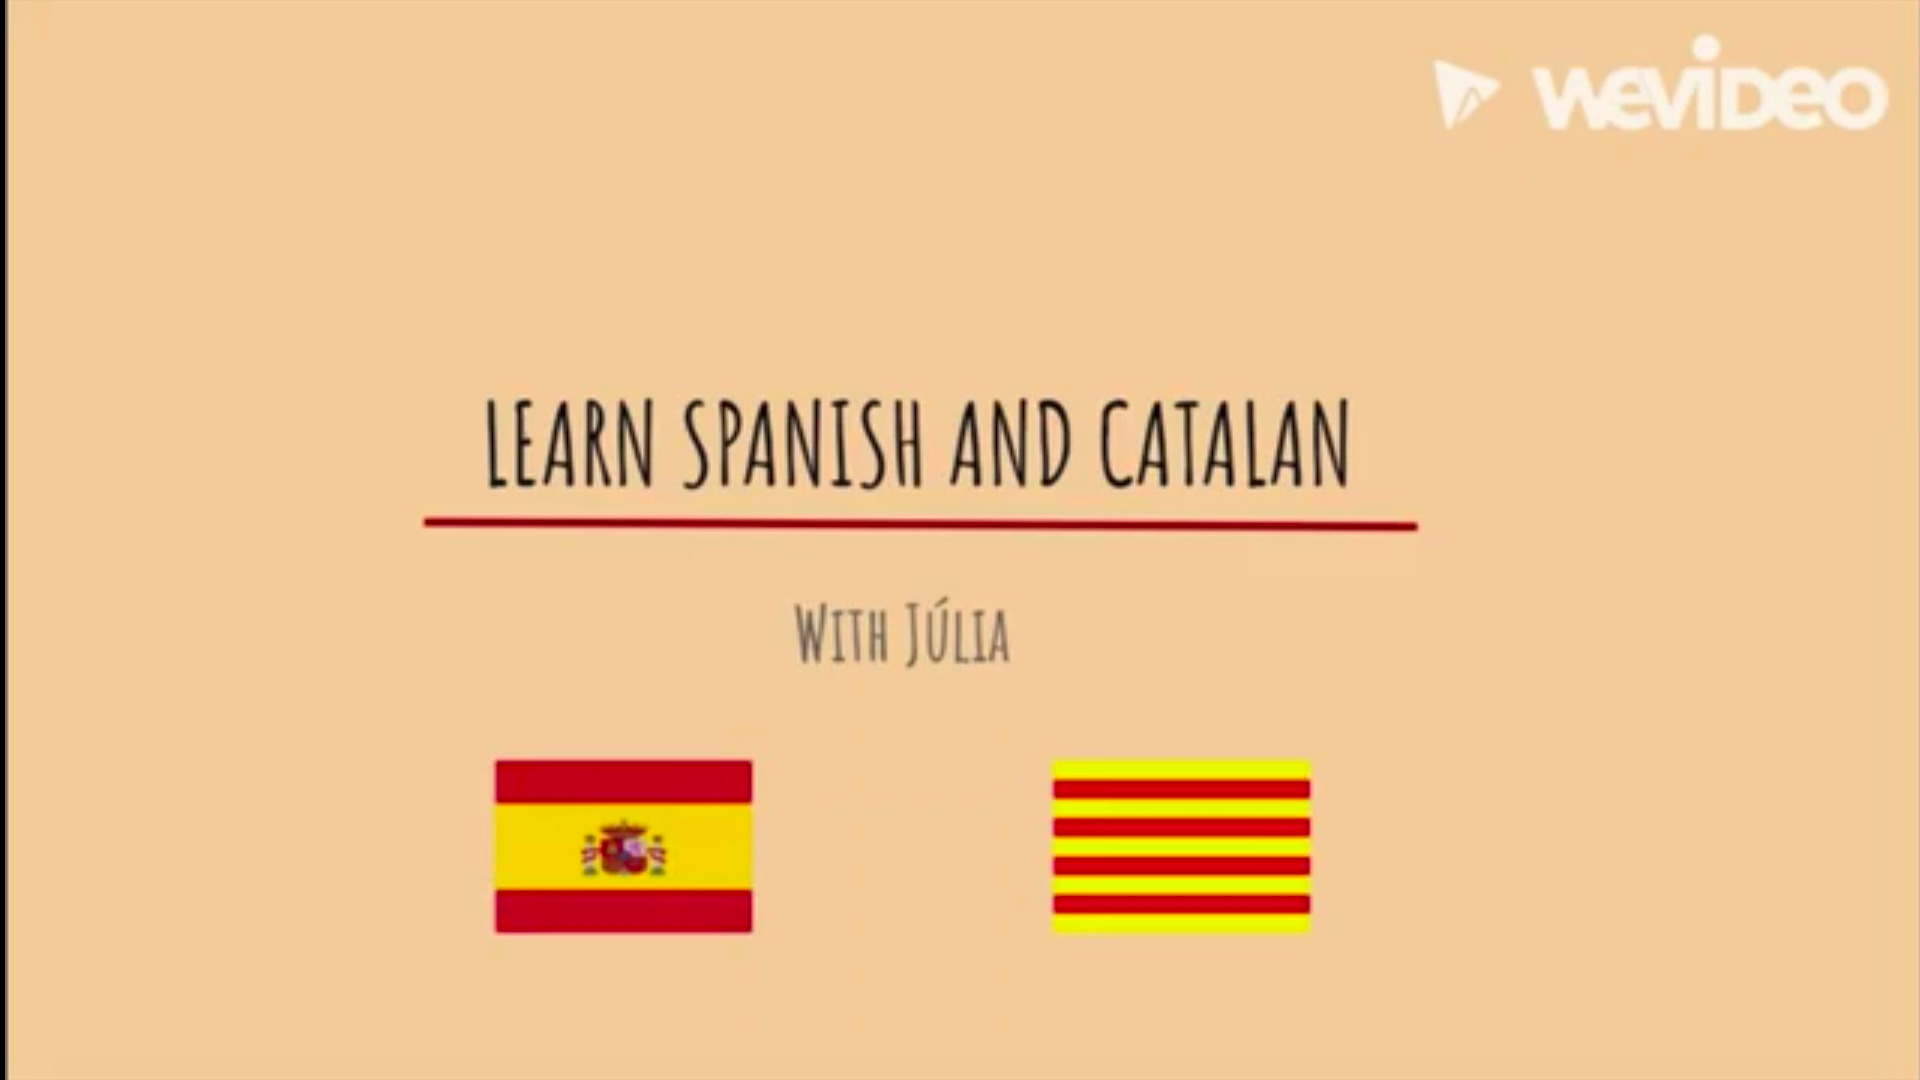 The Catalan Language: How to Learn Catalan Quickly - Fluent in 3